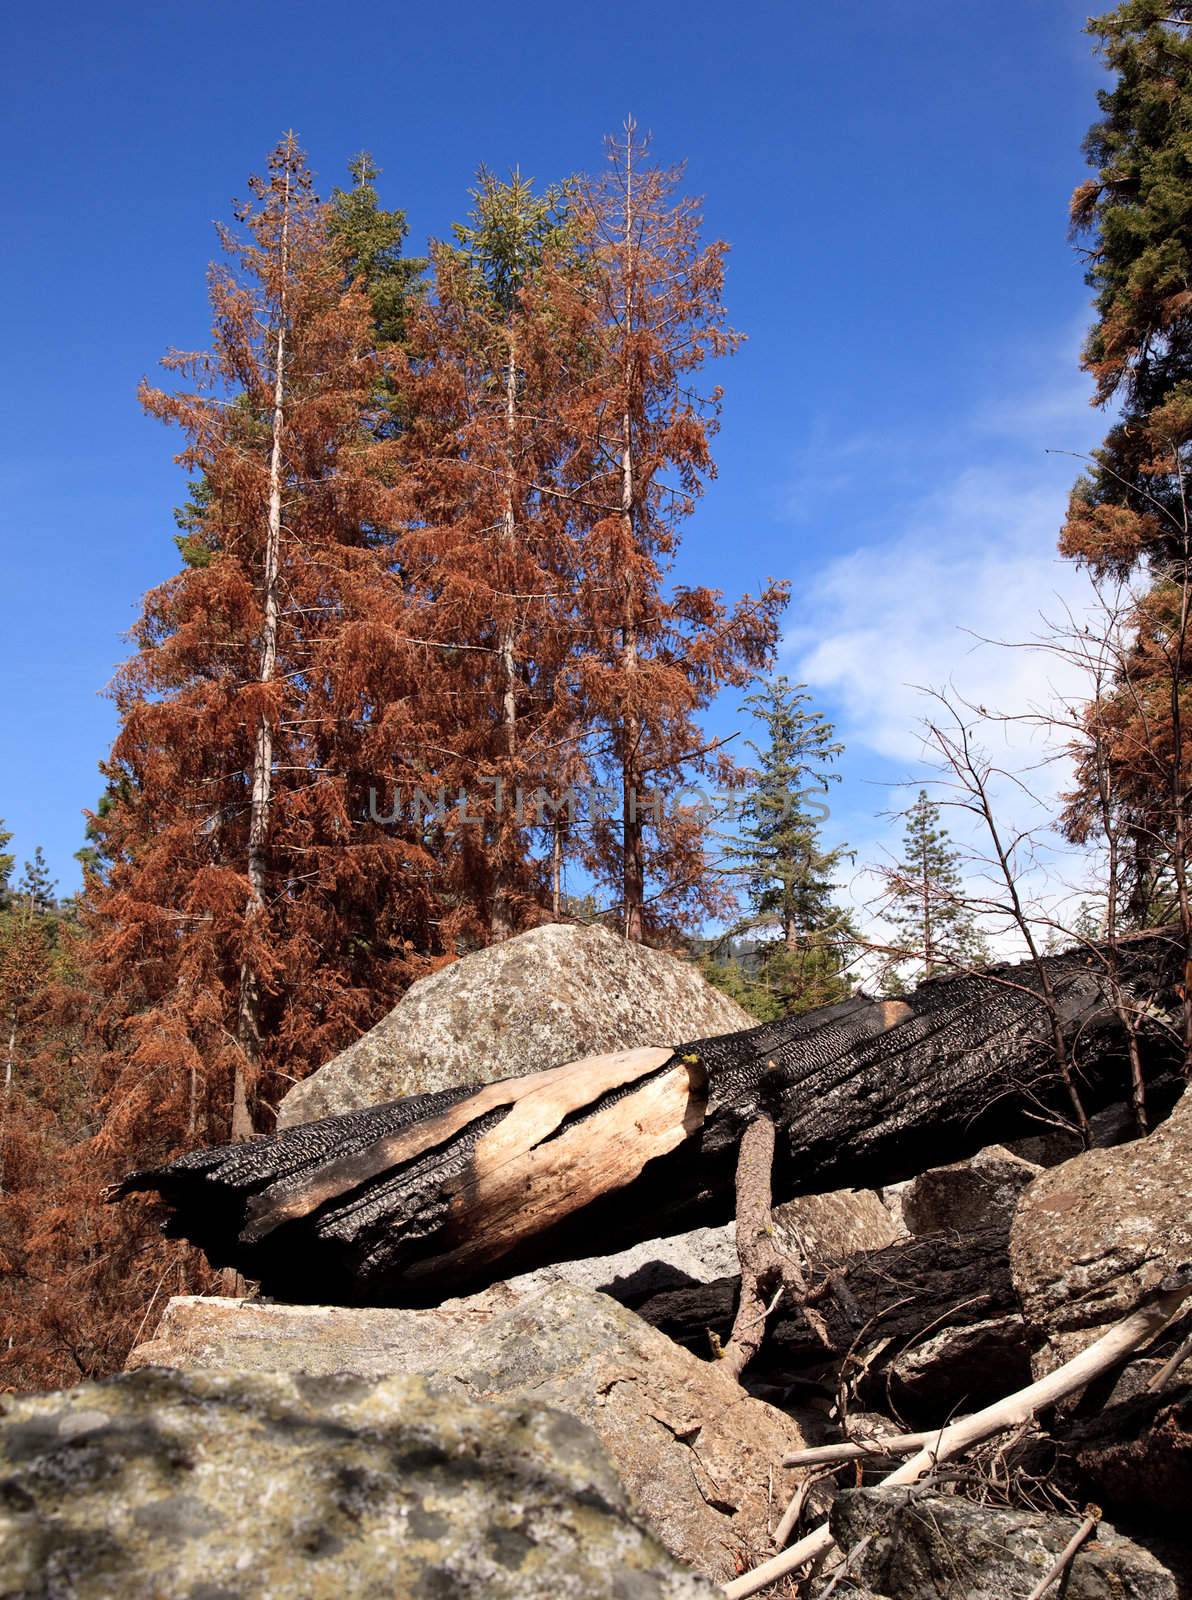 Scorched trees after forest fire by steheap